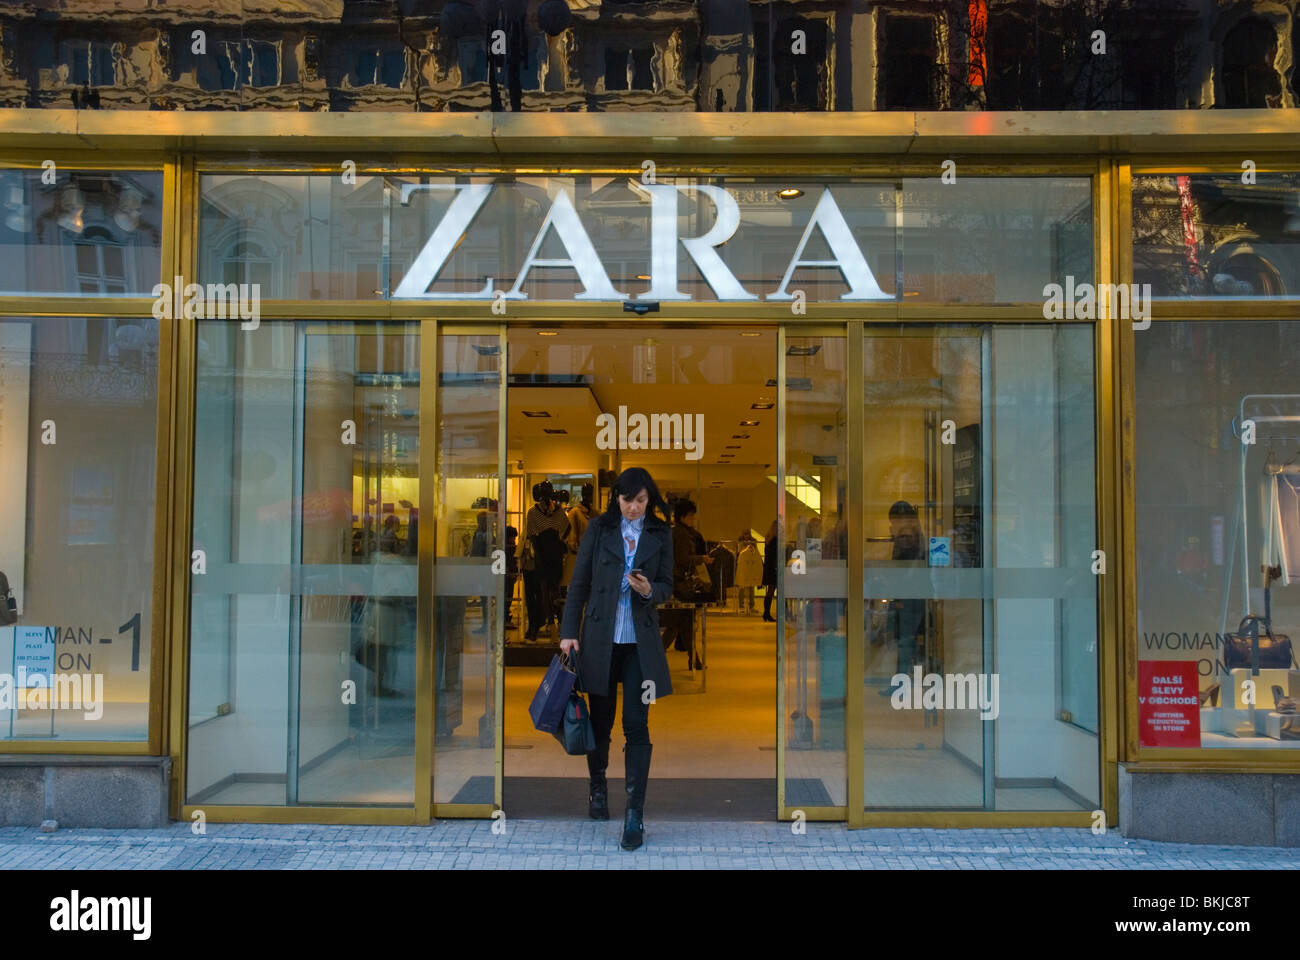 Zara High Resolution Stock Photography and Images - Alamy